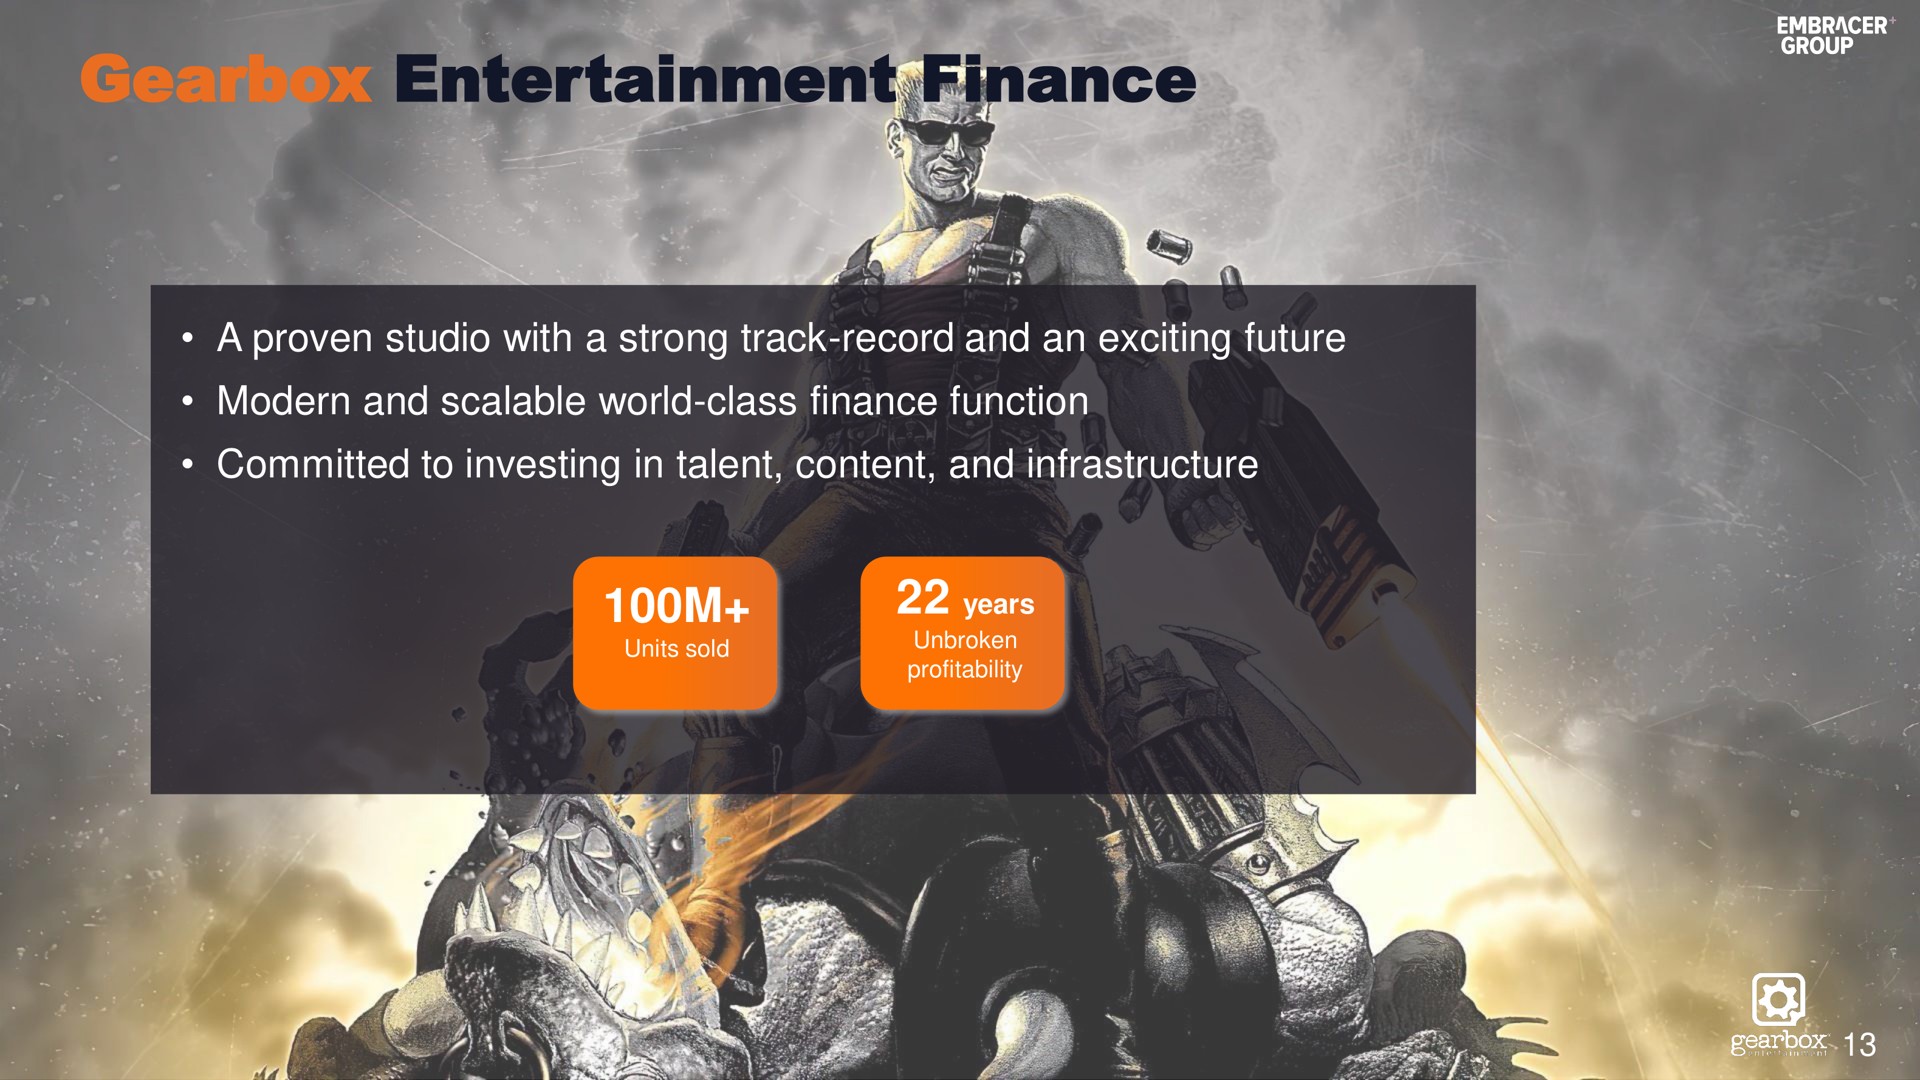 gearbox entertainment finance | Embracer Group